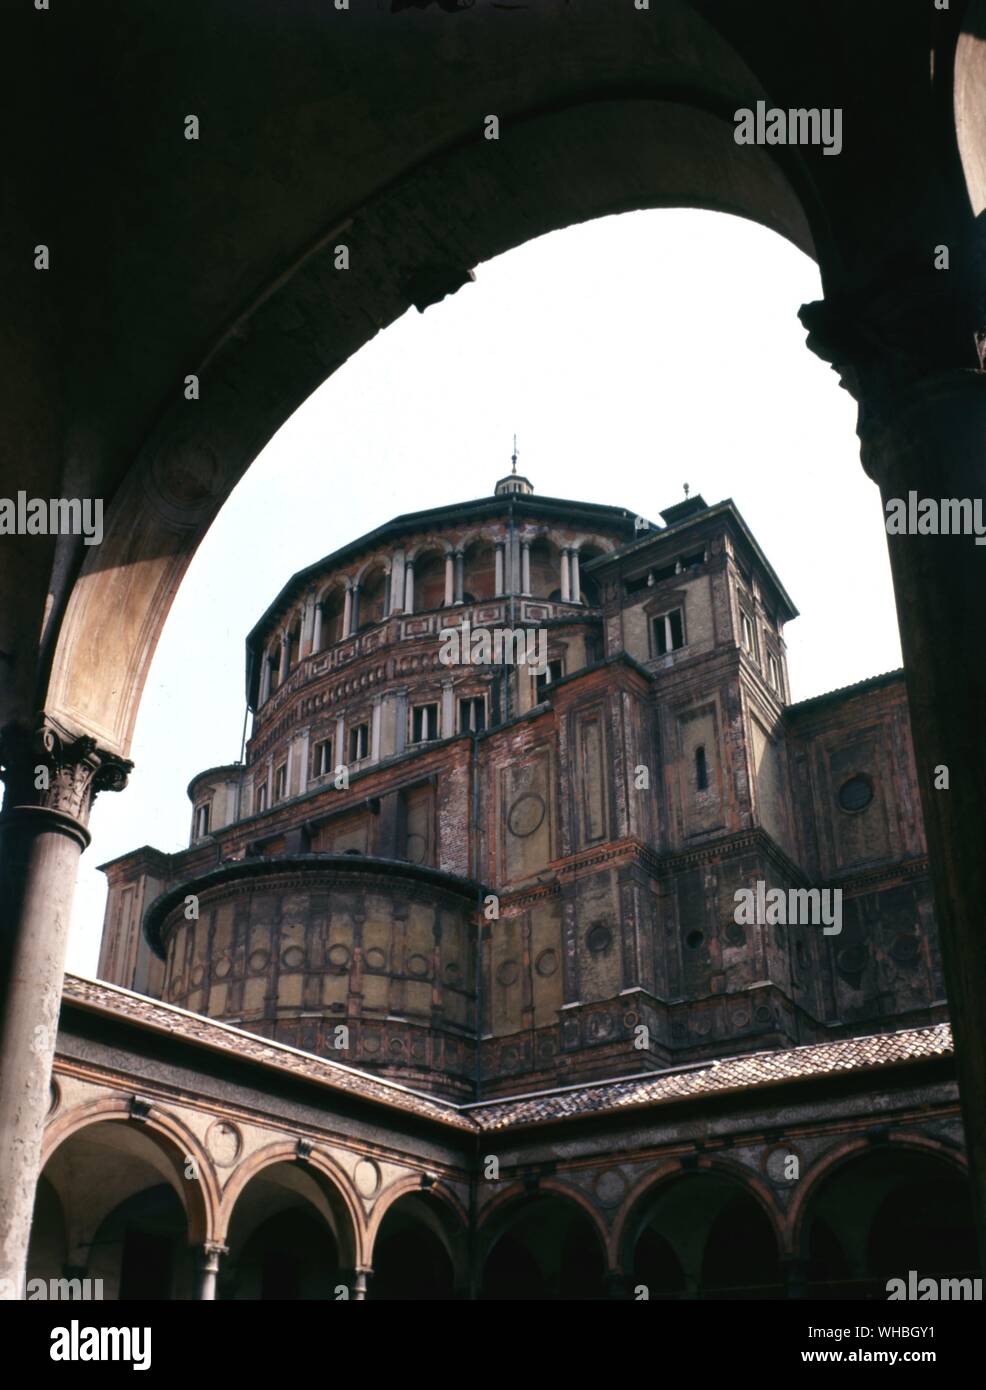 S M delle Grazie - Milan - Italy - Santa Maria delle Grazie is a famous church and convent in Milan, included in the UNESCO World Heritage sites list. The church is also famous for the mural of the Last Supper by Leonardo da Vinci, which is in the refectory of the convent.. Stock Photo